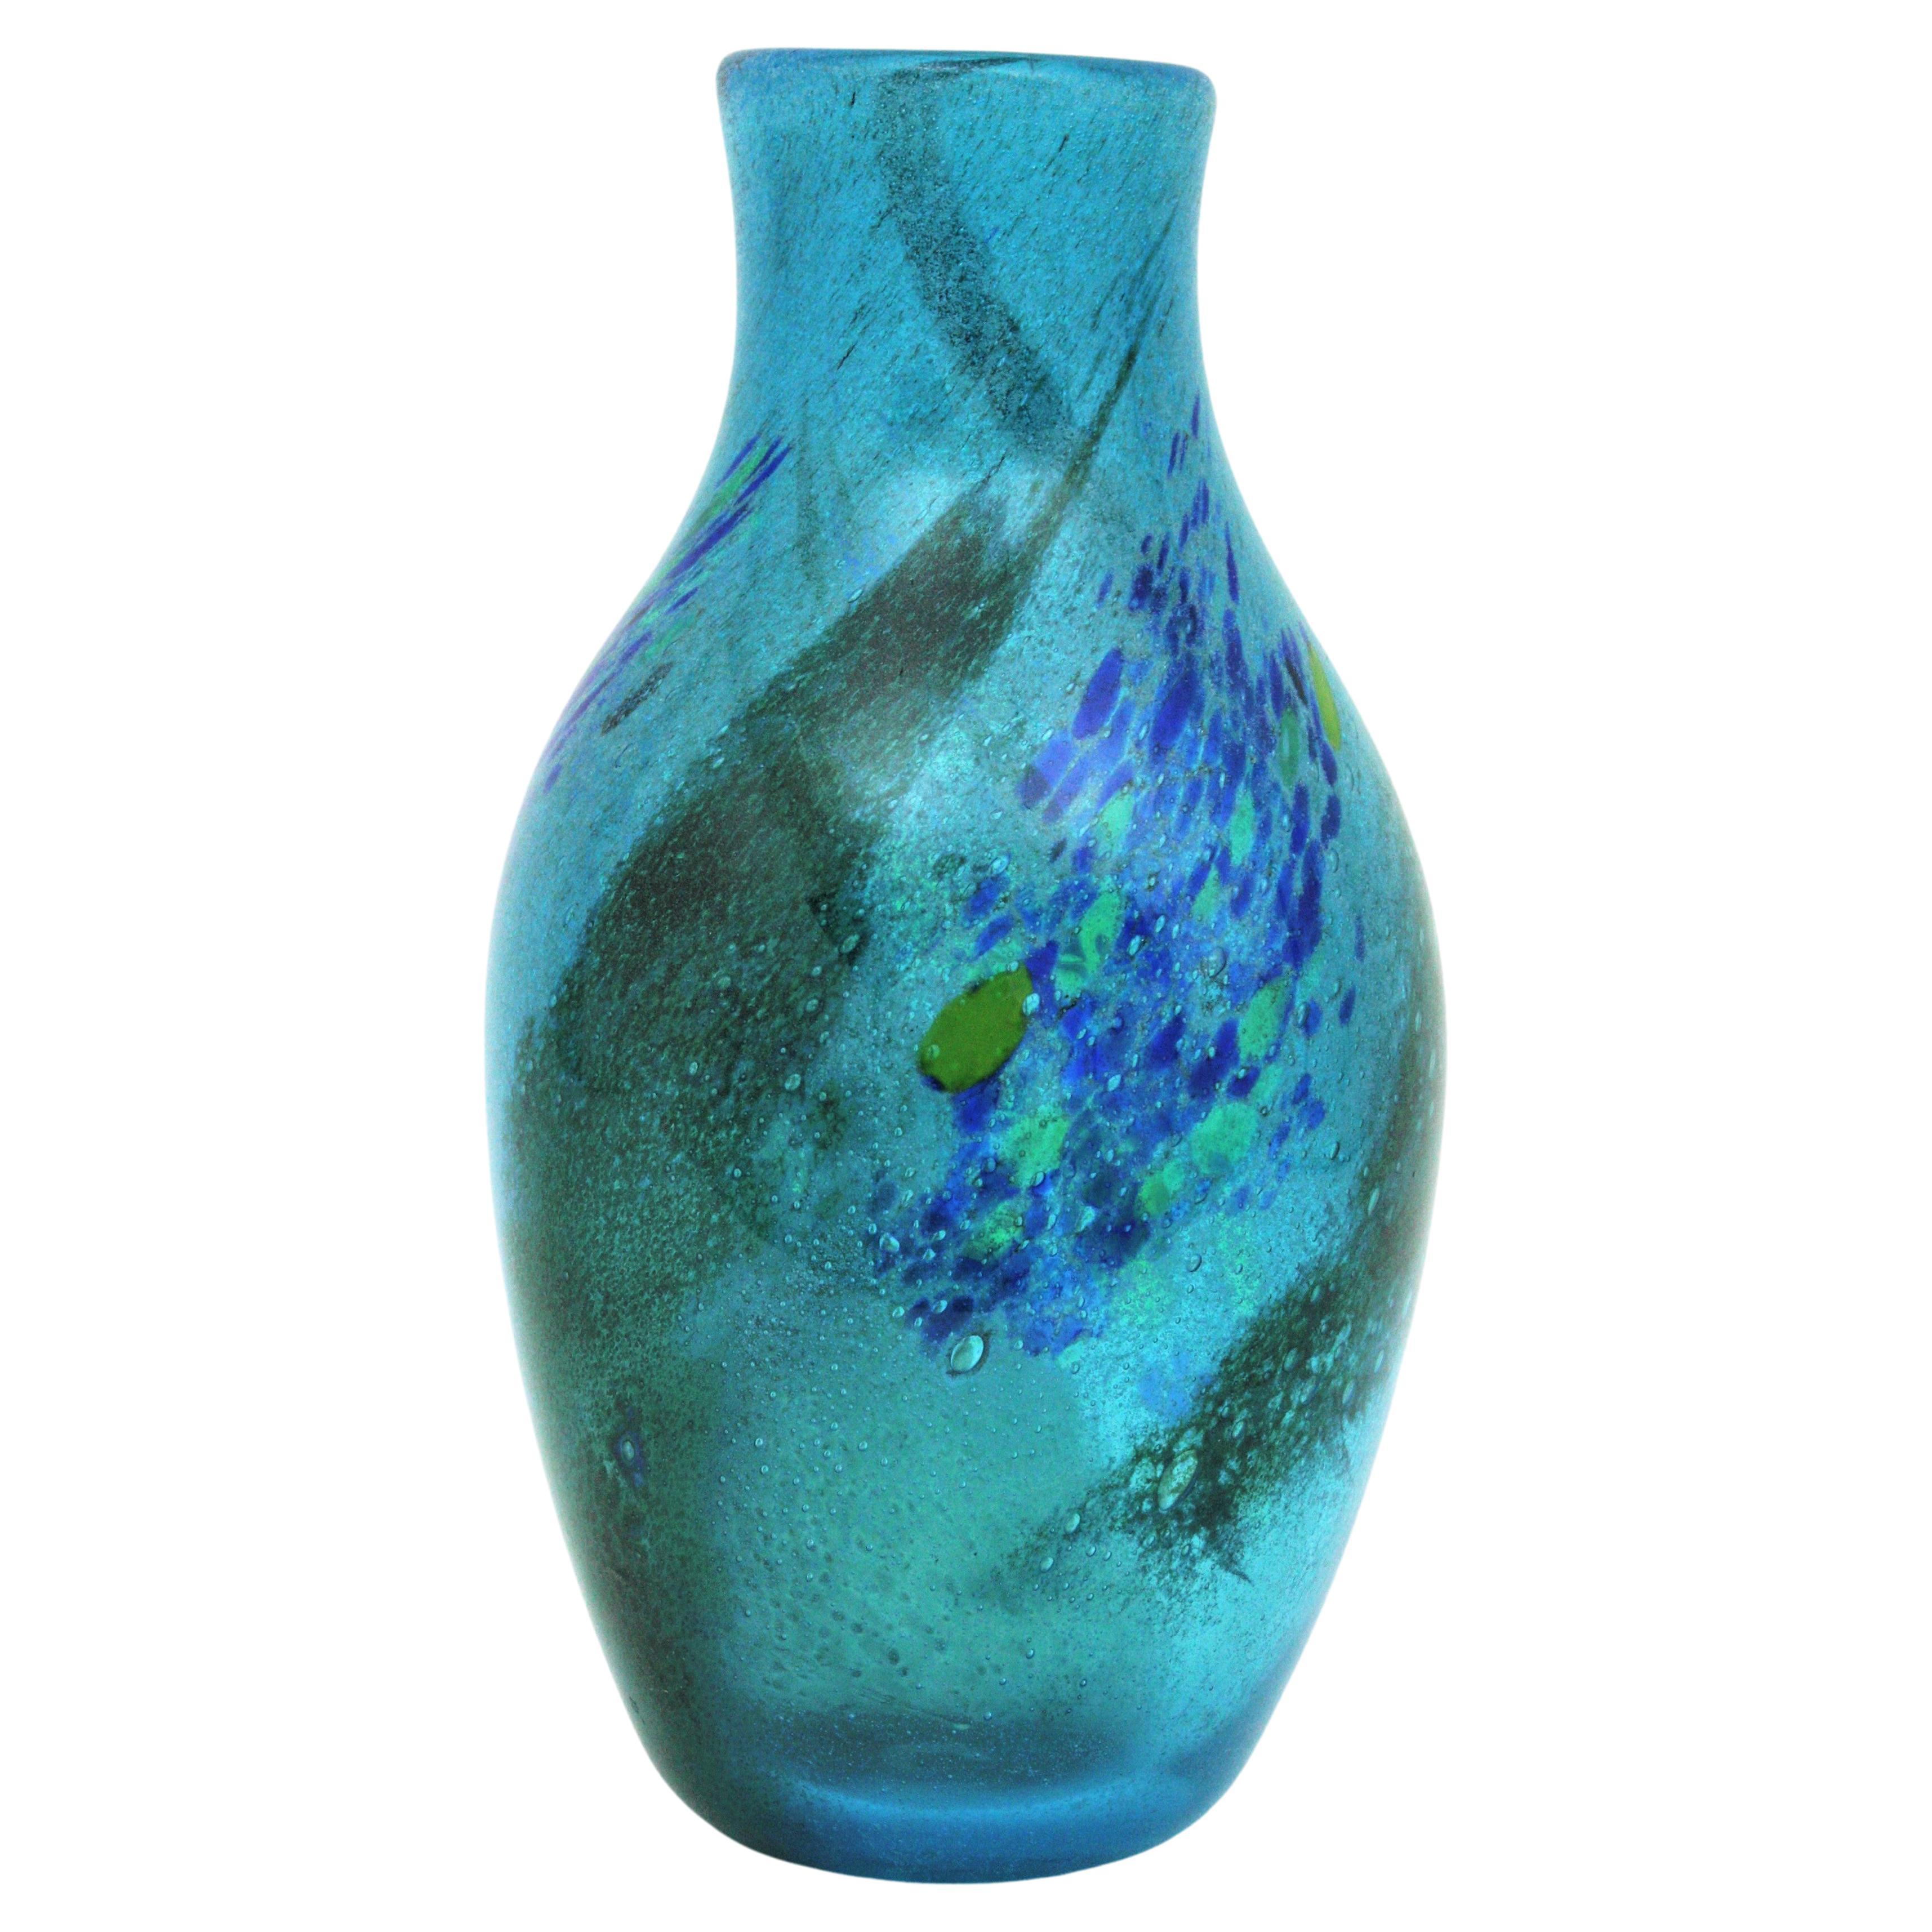 Hand blown blue Murano pulegoso art glass vase with Starry Night murrine decoration. Attributed to Arte Vetraria Muranese (A.V.E.M.), Italy, 1950s.
Exquisite and sculptural handblown Murano glass vase with an eye-catching 'Apparenza' design